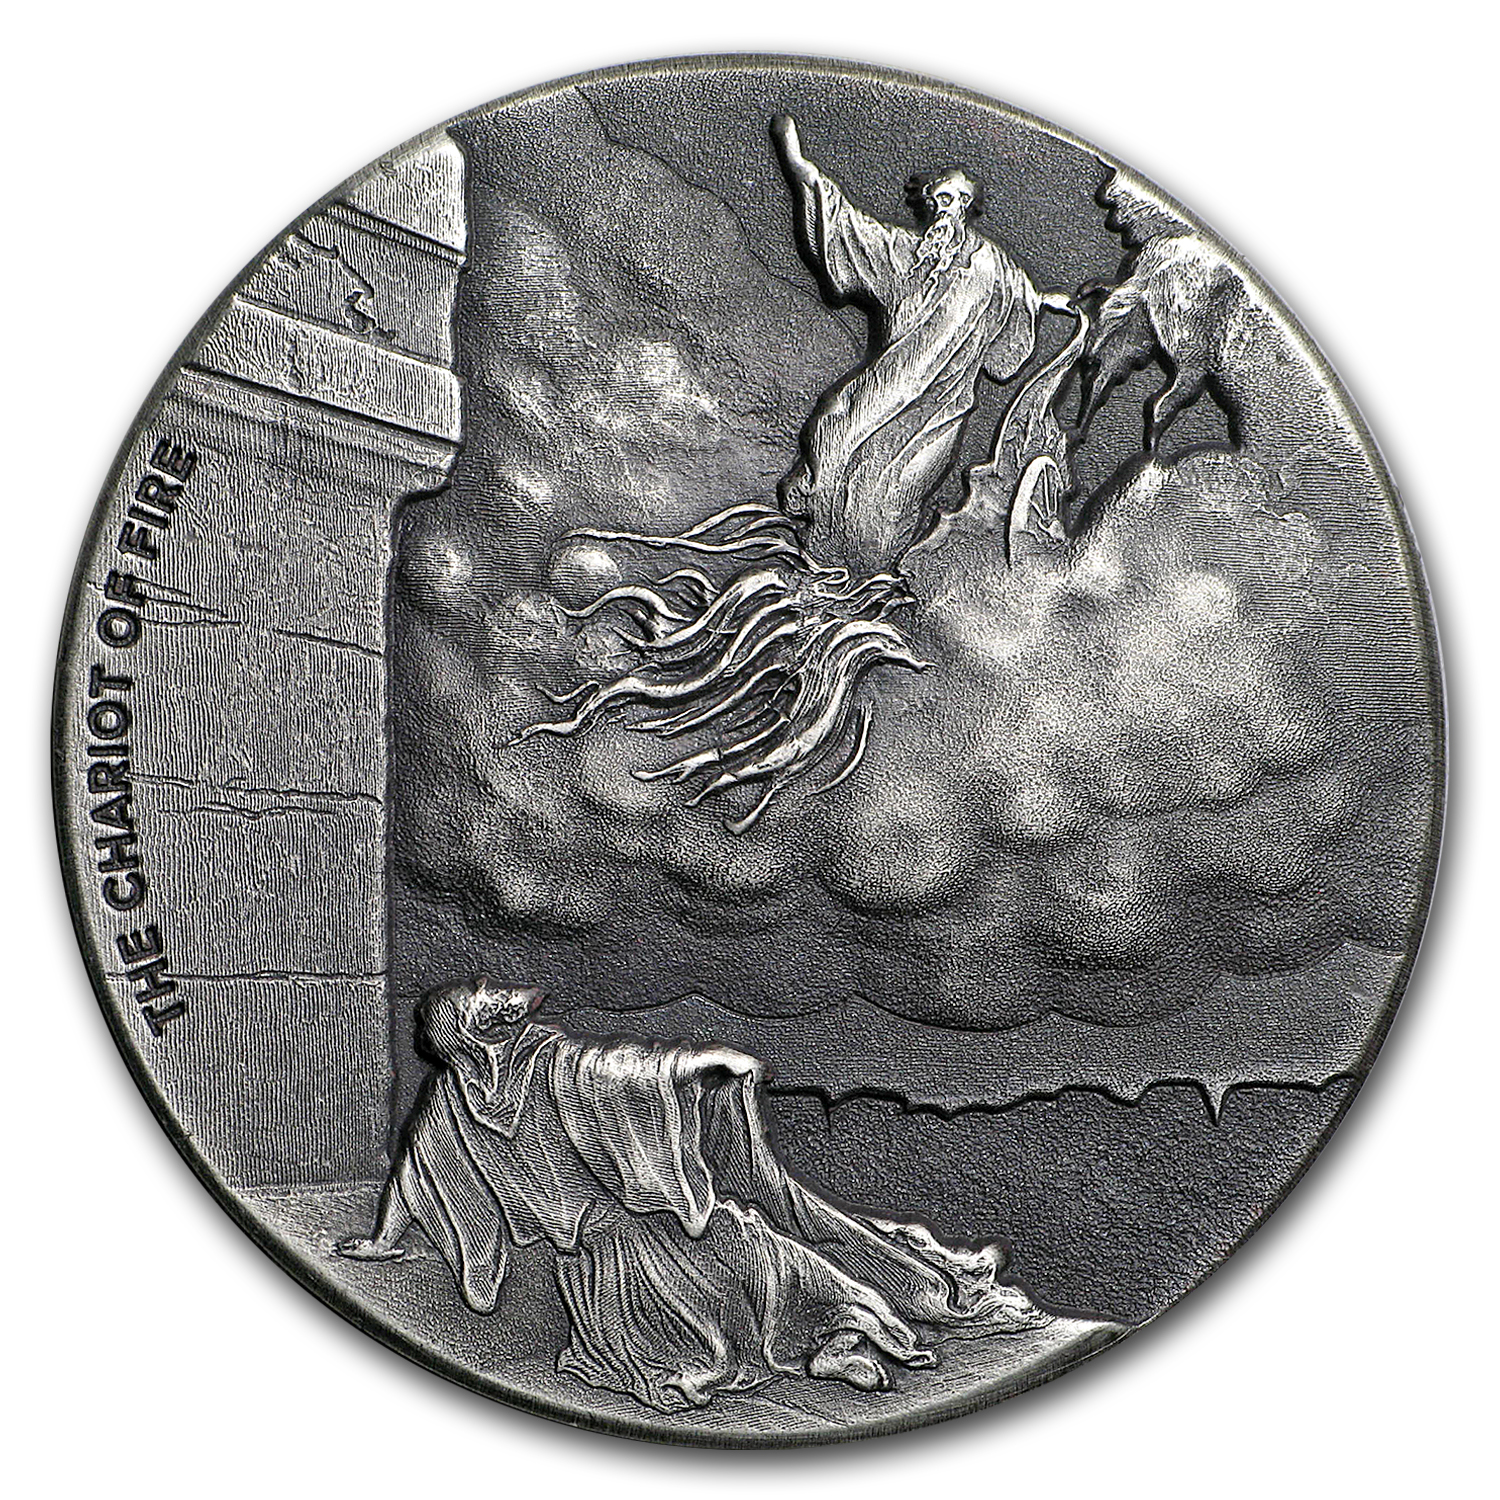 Buy 2018 2 oz Silver Coin - Biblical Series (Chariot of Fire)